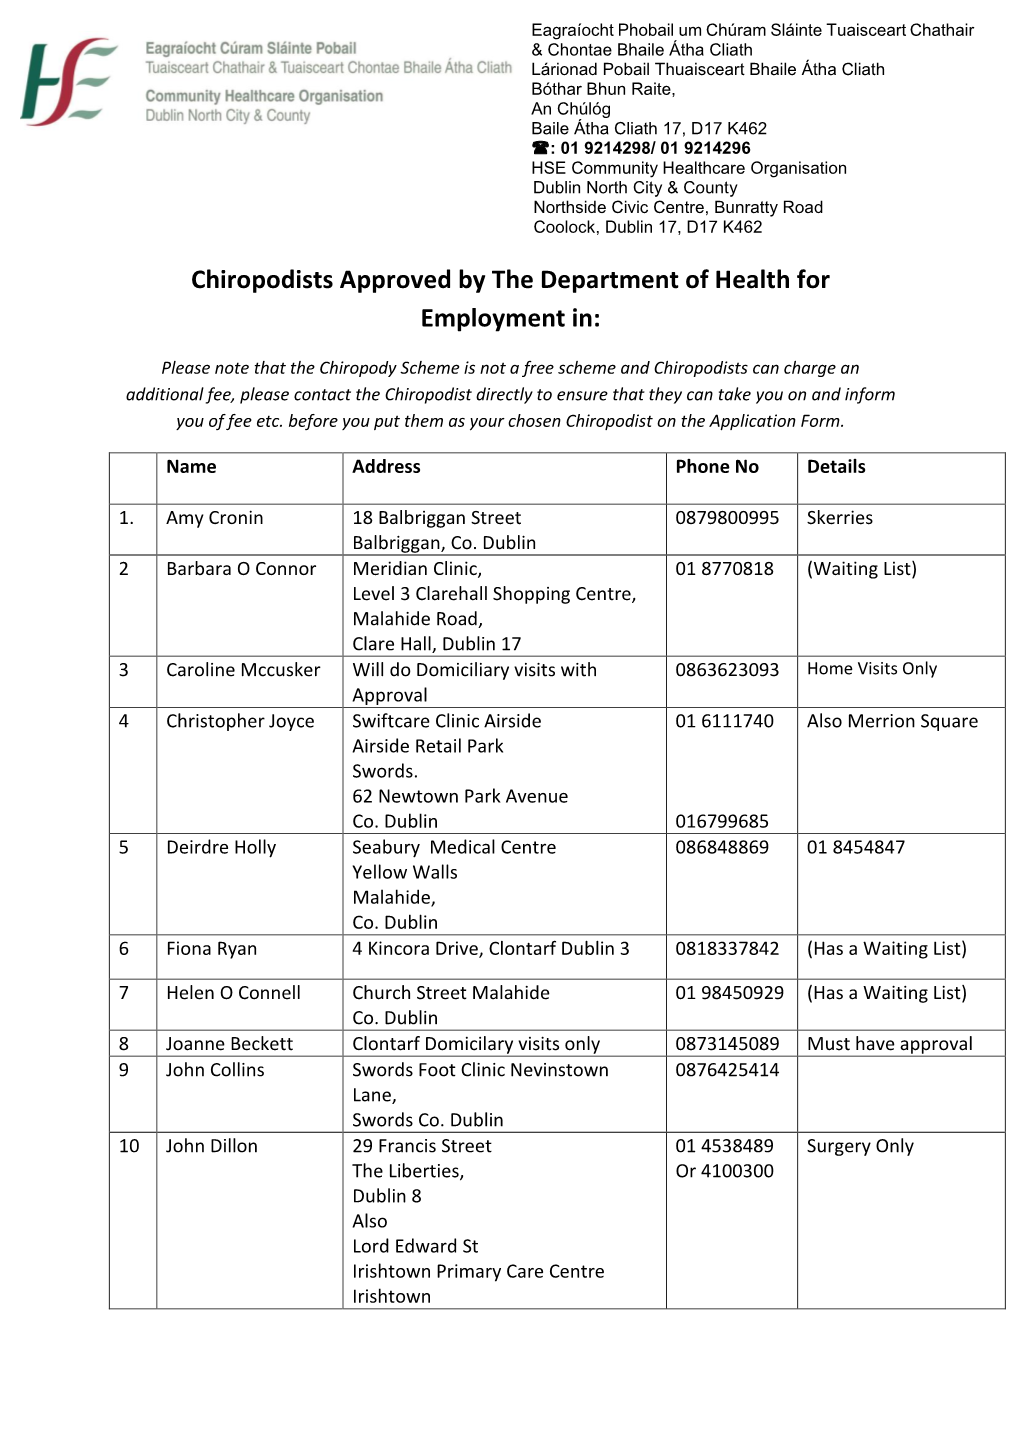 Chiropodists Approved by the Department of Health for Employment In